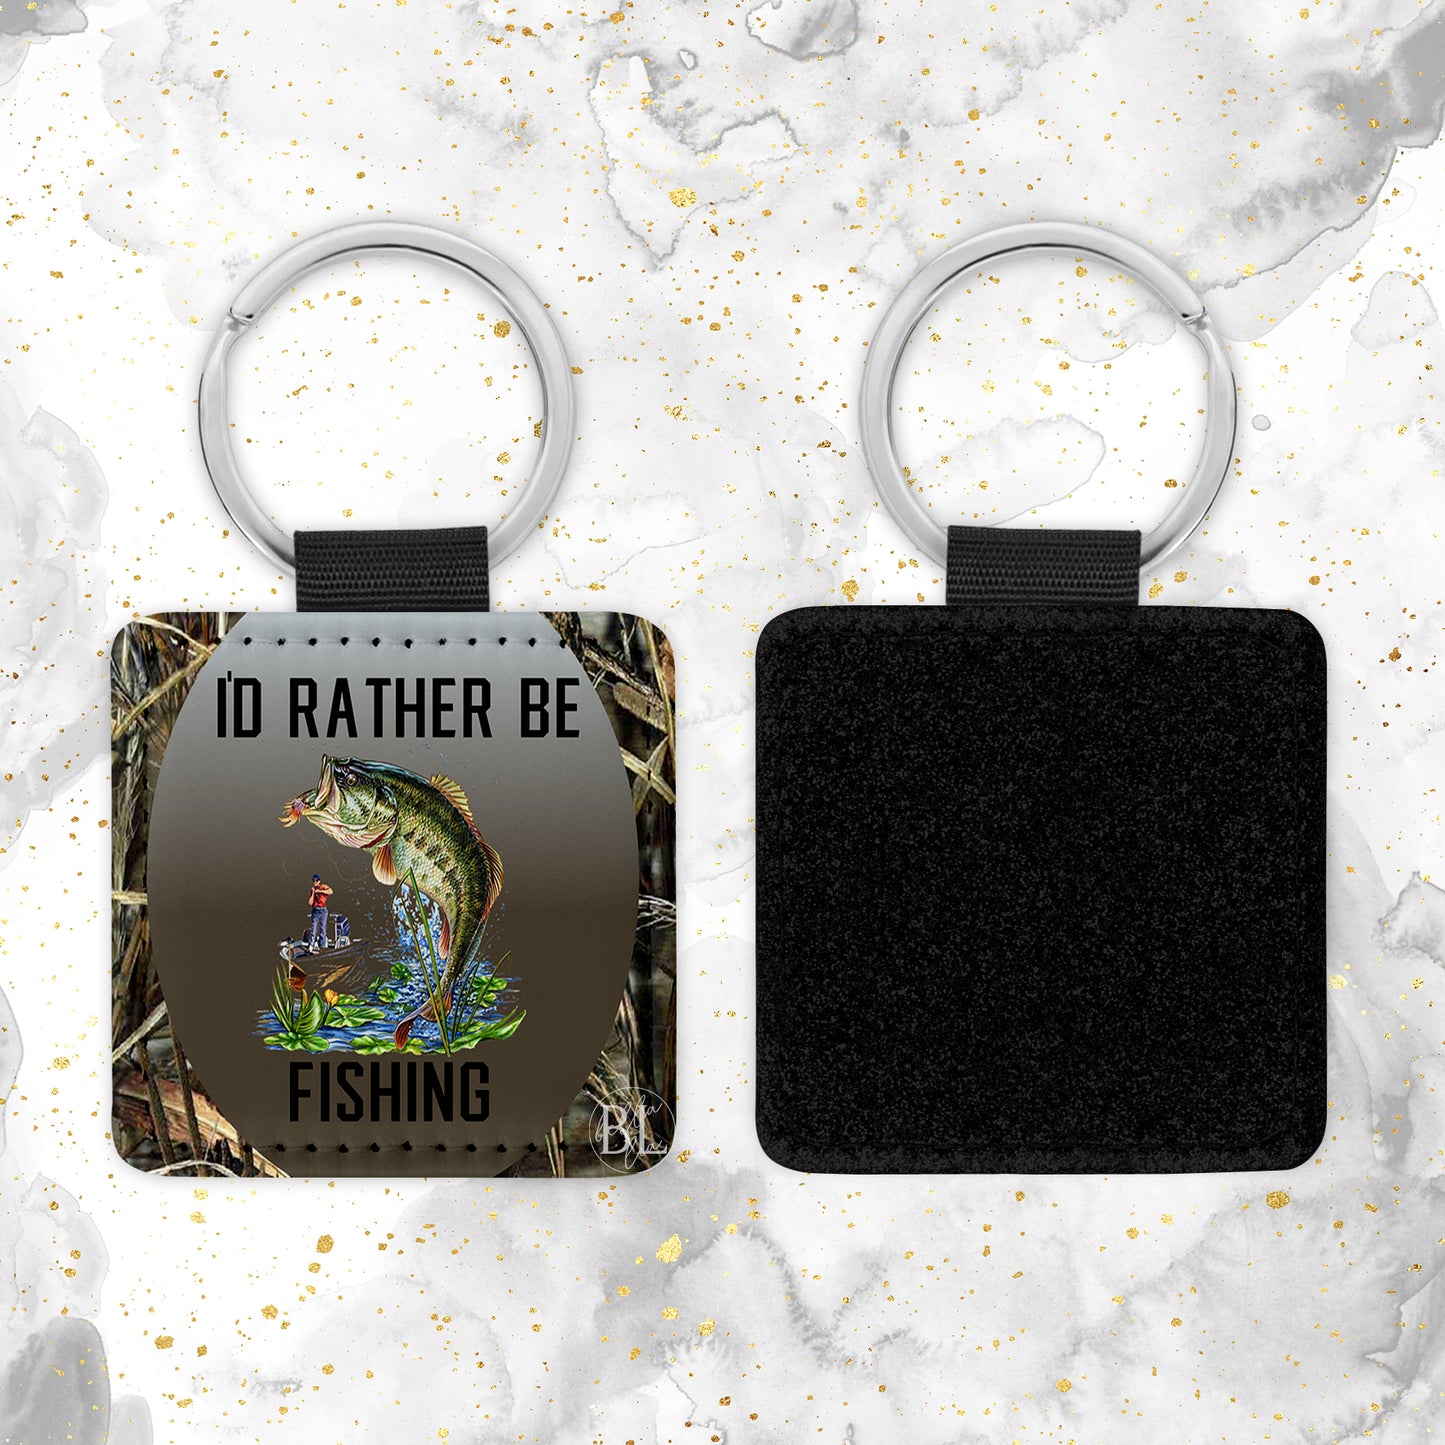 Rather be Fishing Leather Keychain - Bella Lia Boutique